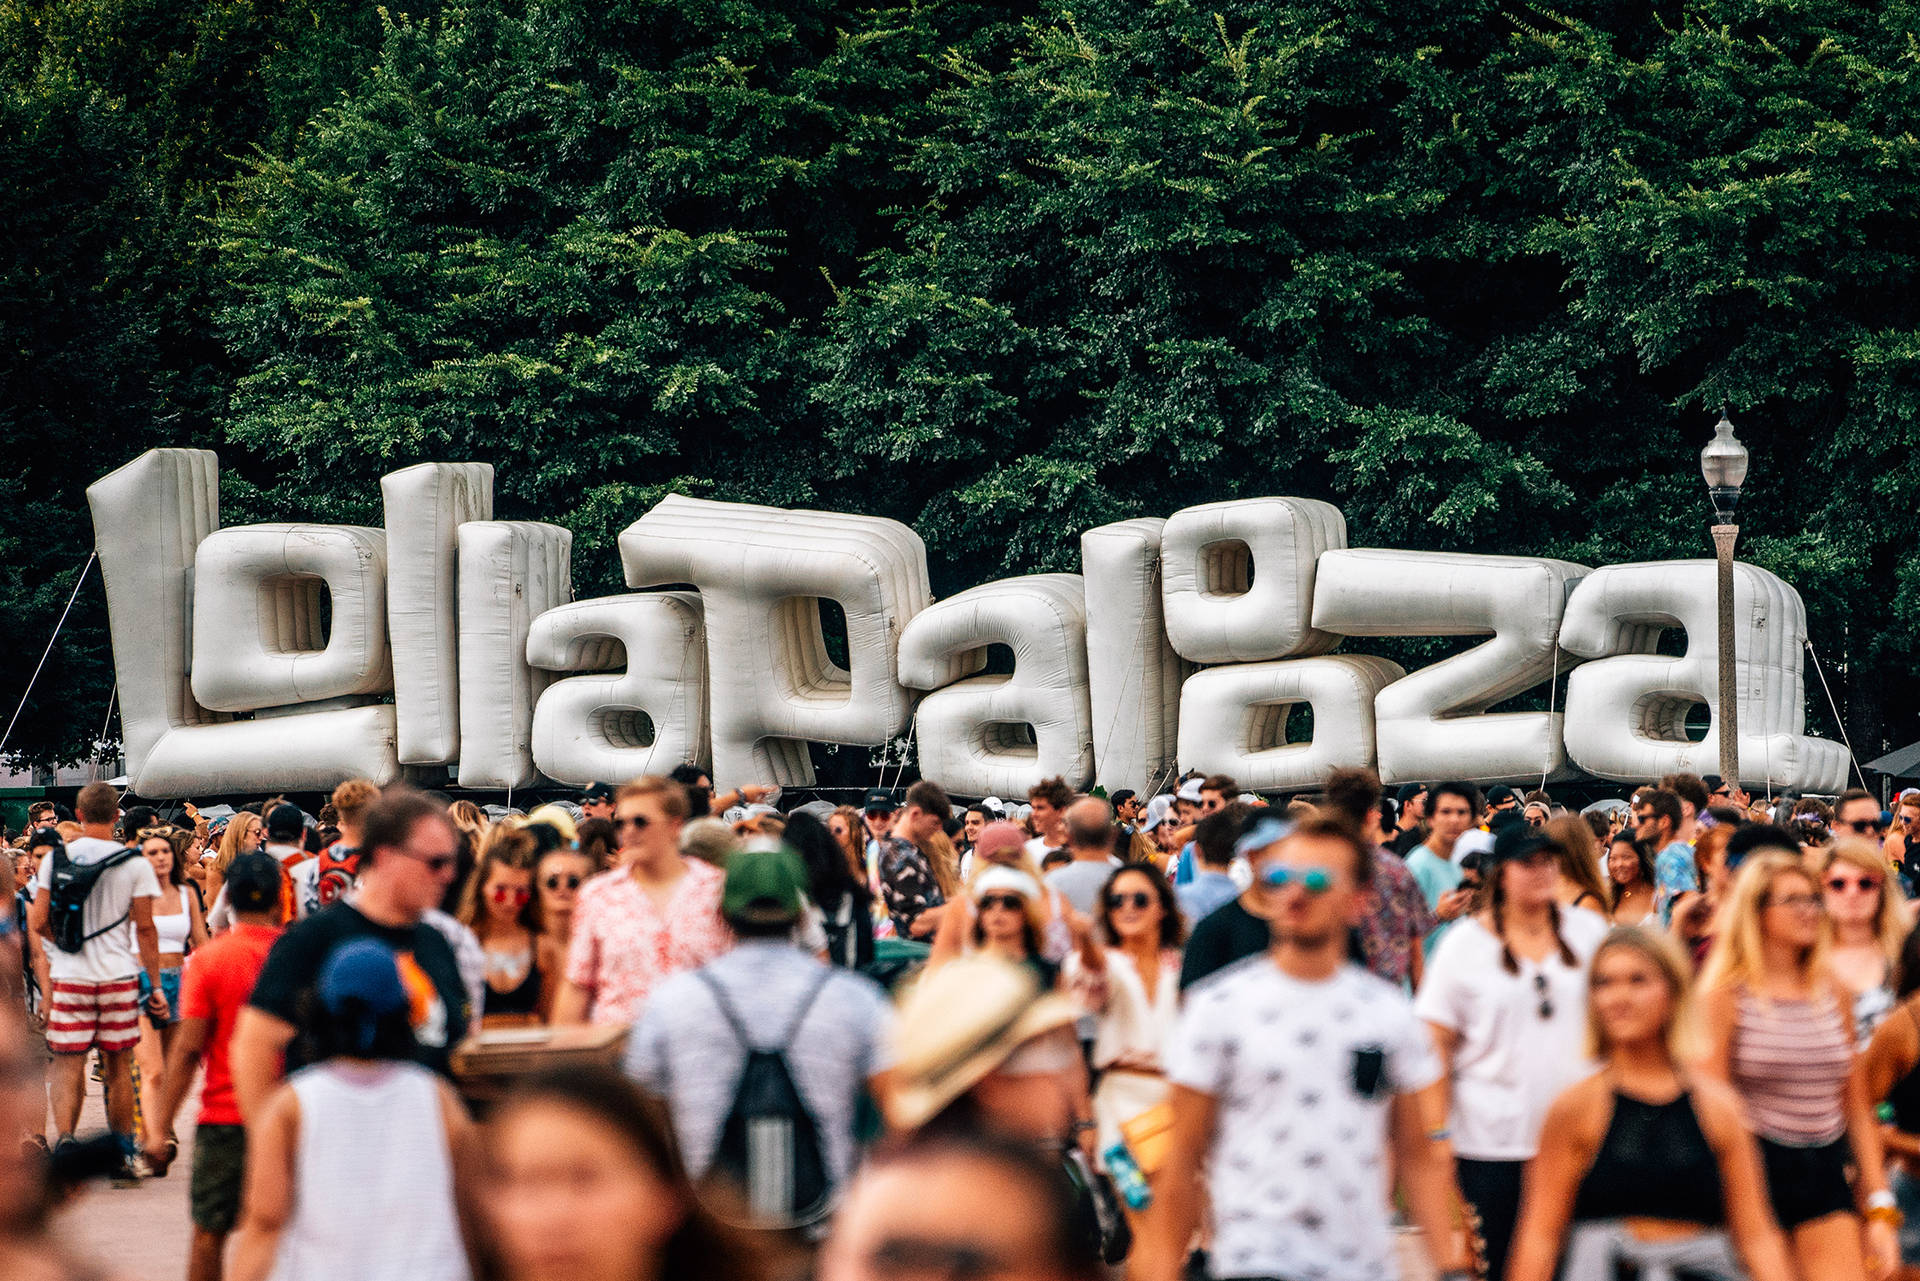 Get Pumped Up With Lollapalooza's Giant Inflatable! Background